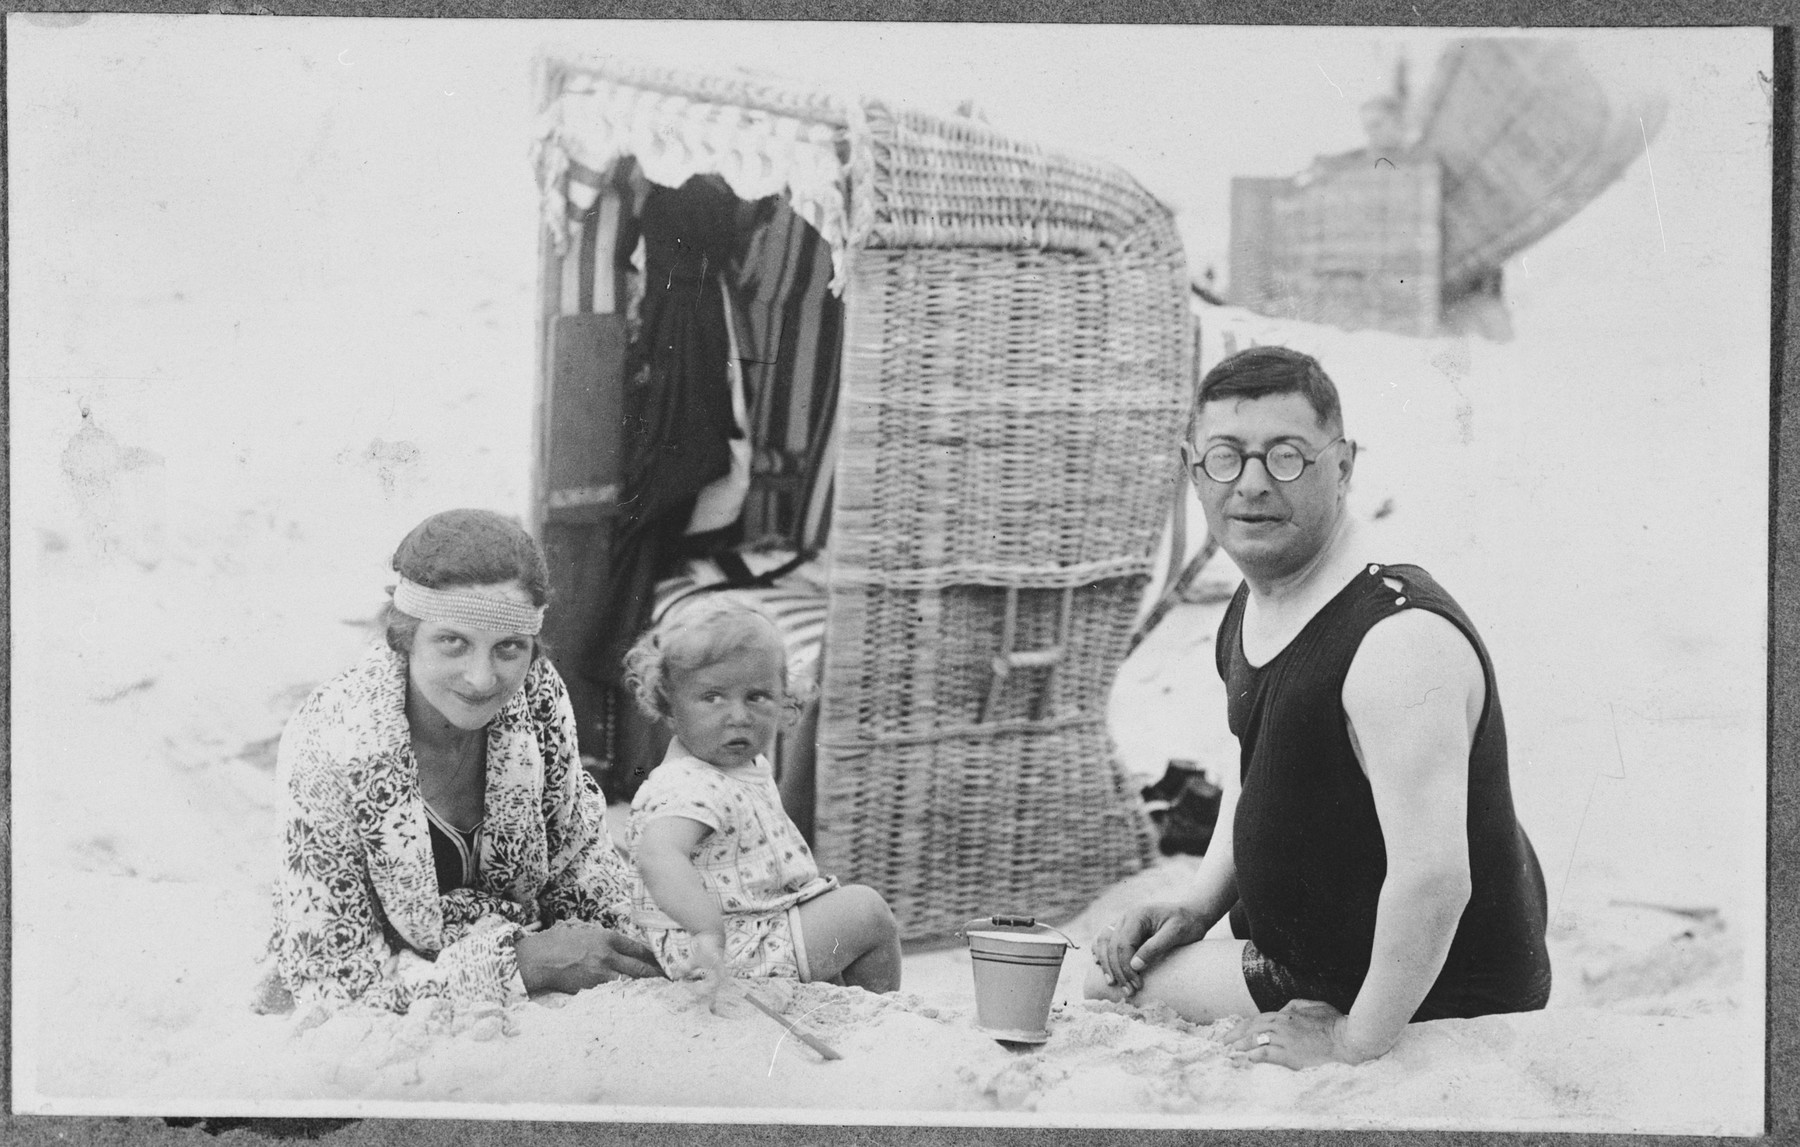 The Glueckstein family relaxes on a beach in front of a cabana.

Pictured from left to right are Hedwig, Fritz and Georg Glueckstein.